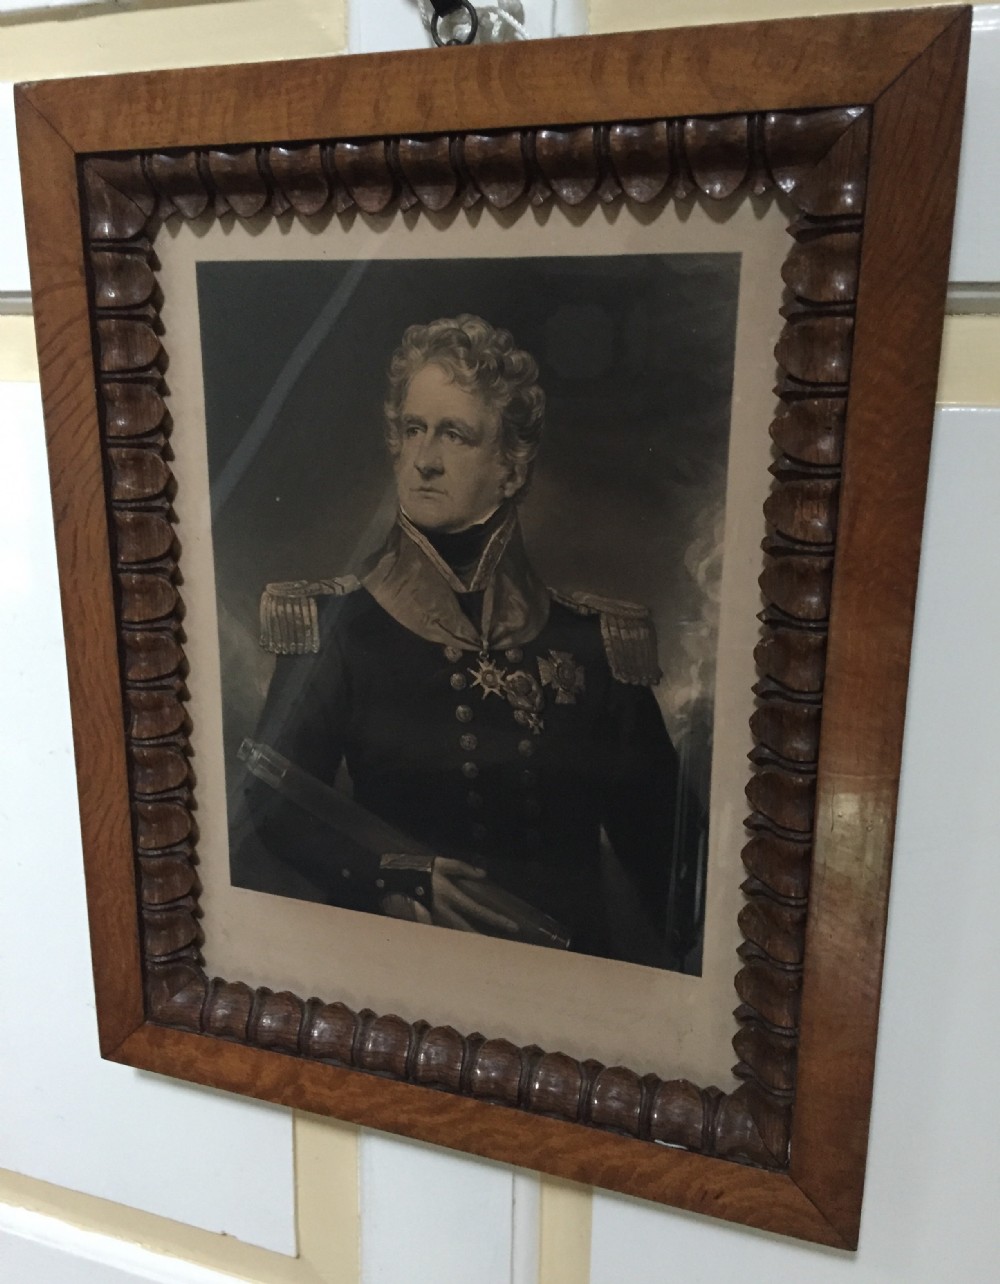 documentary and decorative c19th portrait engraving of admiral sir charles rowley bt in original oak frame